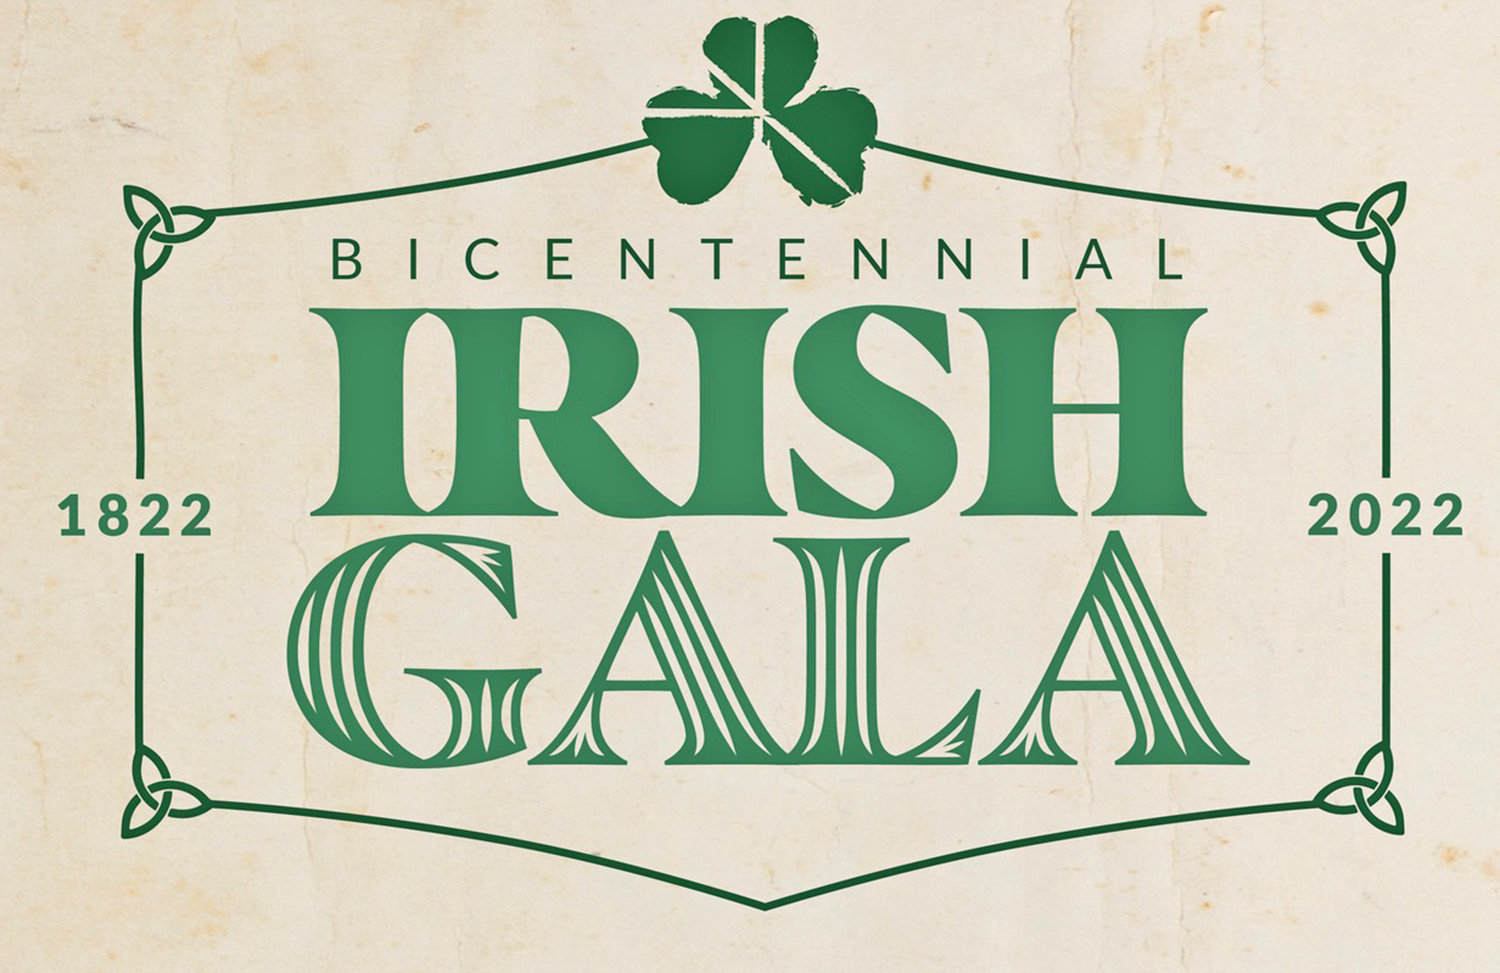 Two centuries of Irish organizations in the Mohawk Valley will be celebrated at the Bicentennial Irish Gala at 6 p.m. Nov. 5 at the Irish Cultural Center of the Mohawk Valley in Utica.